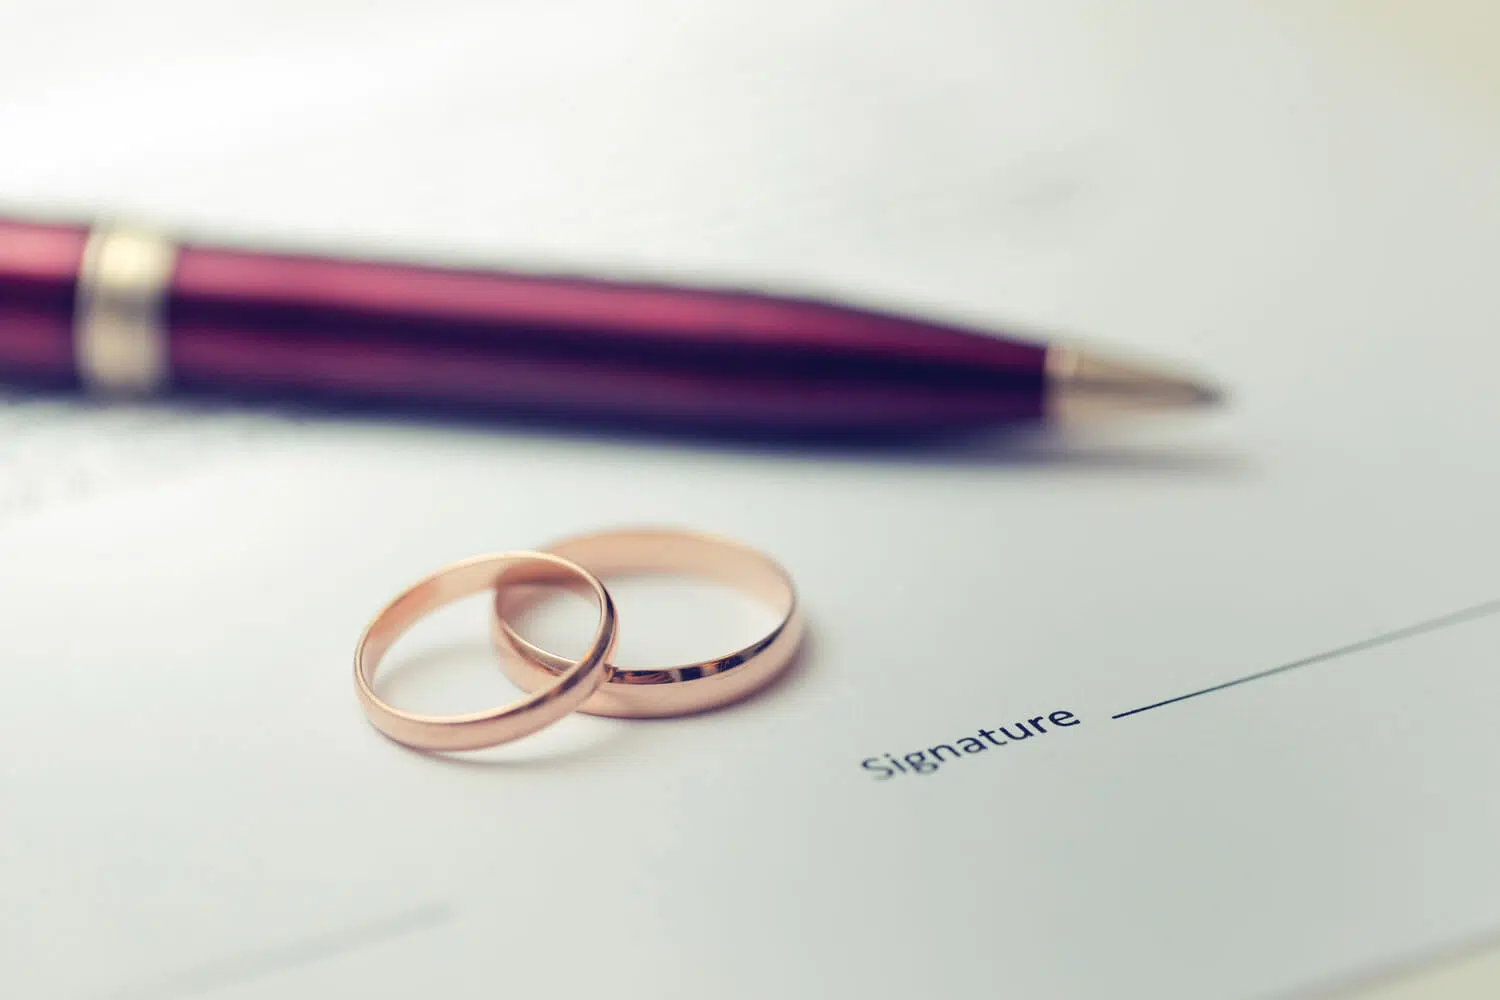 unsigned marriage license and divorce